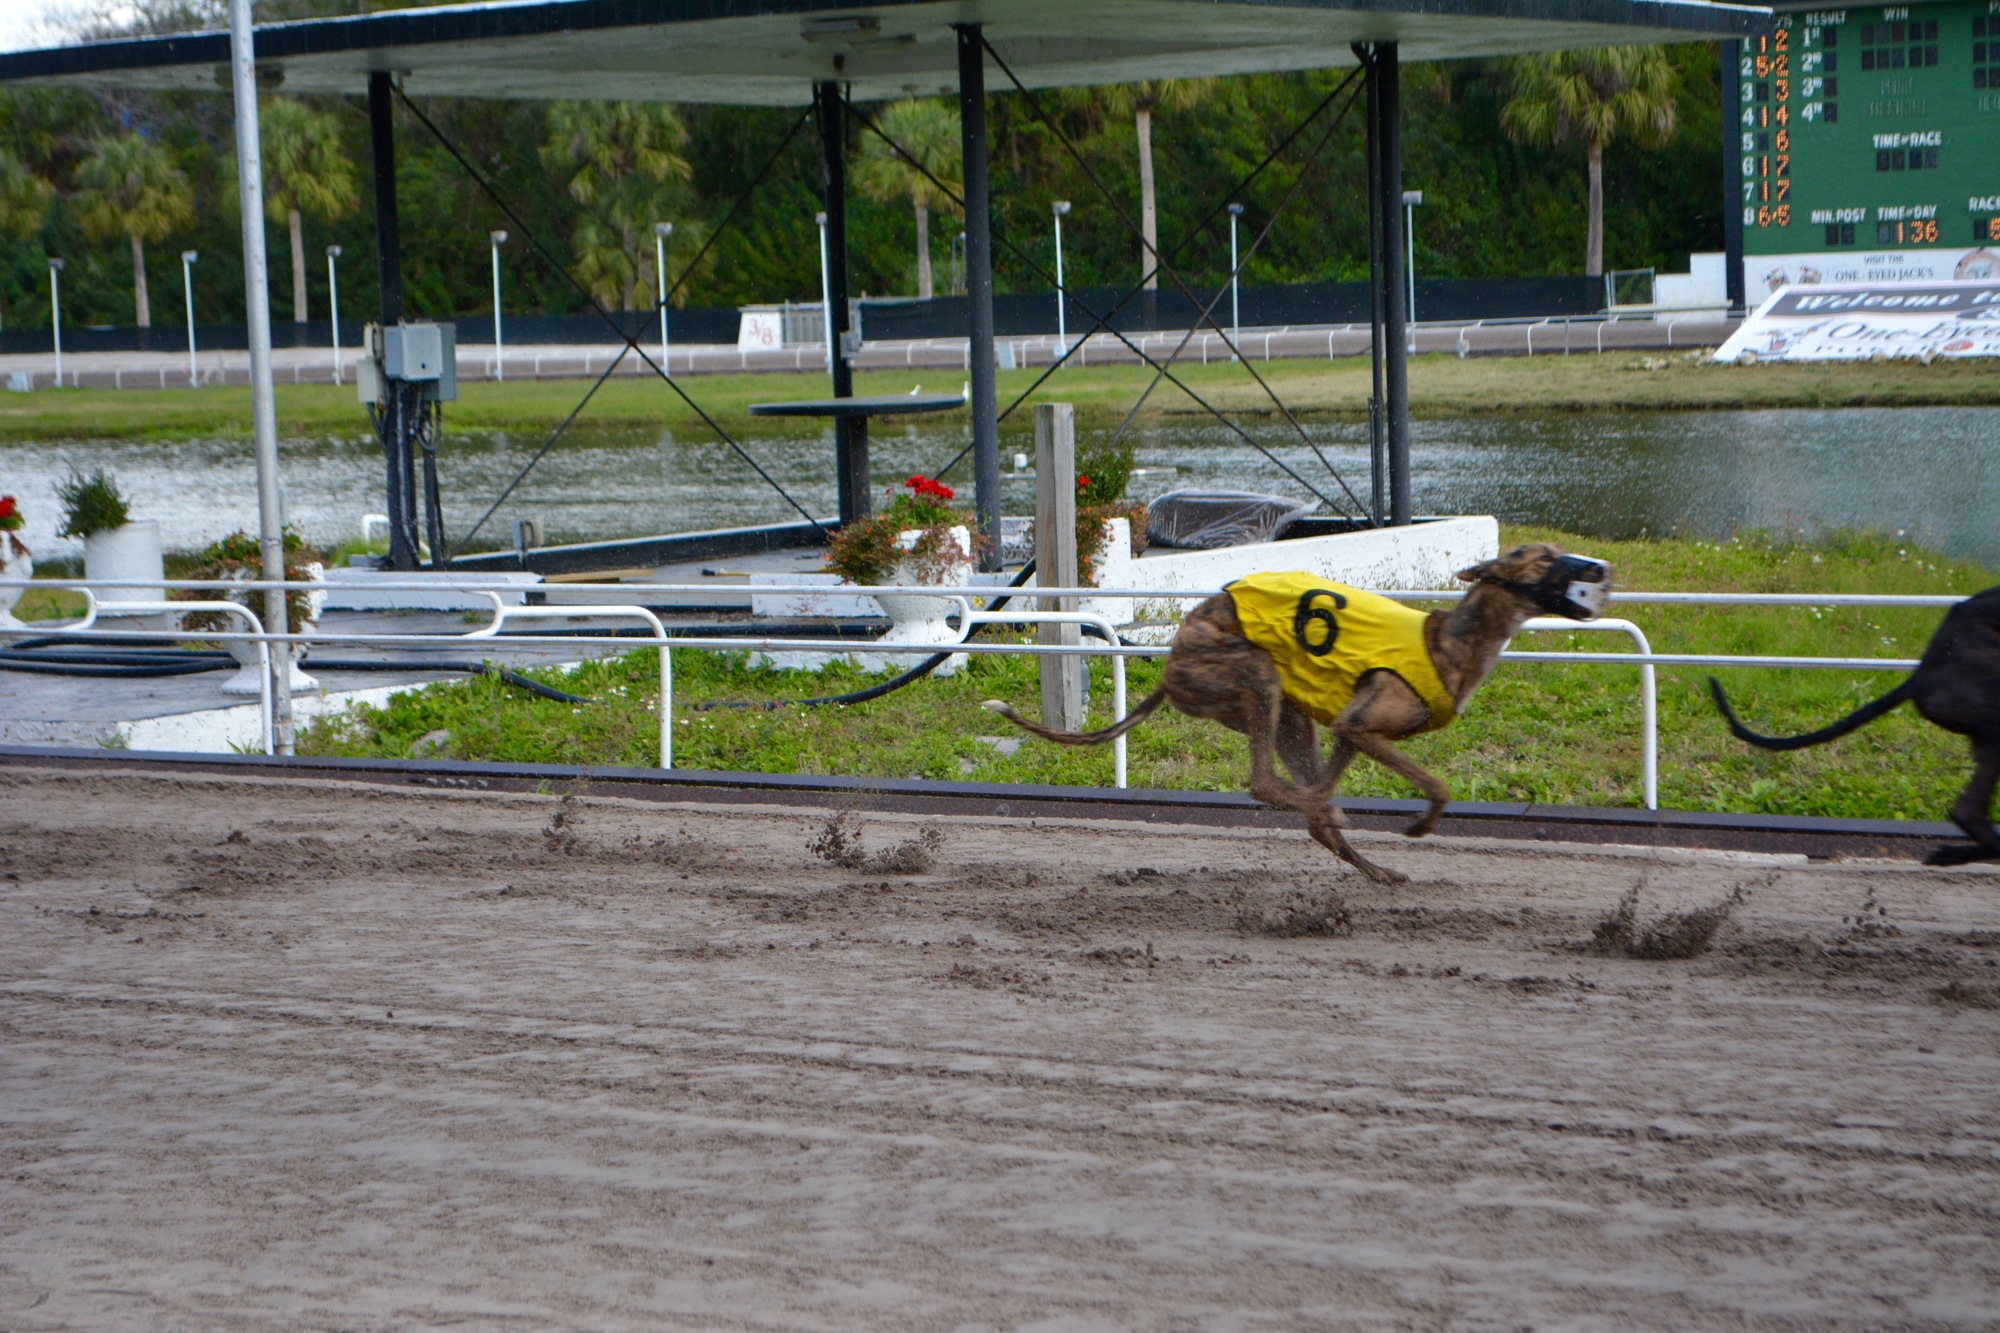 Dog racing came to an end in Sarasota in May. 